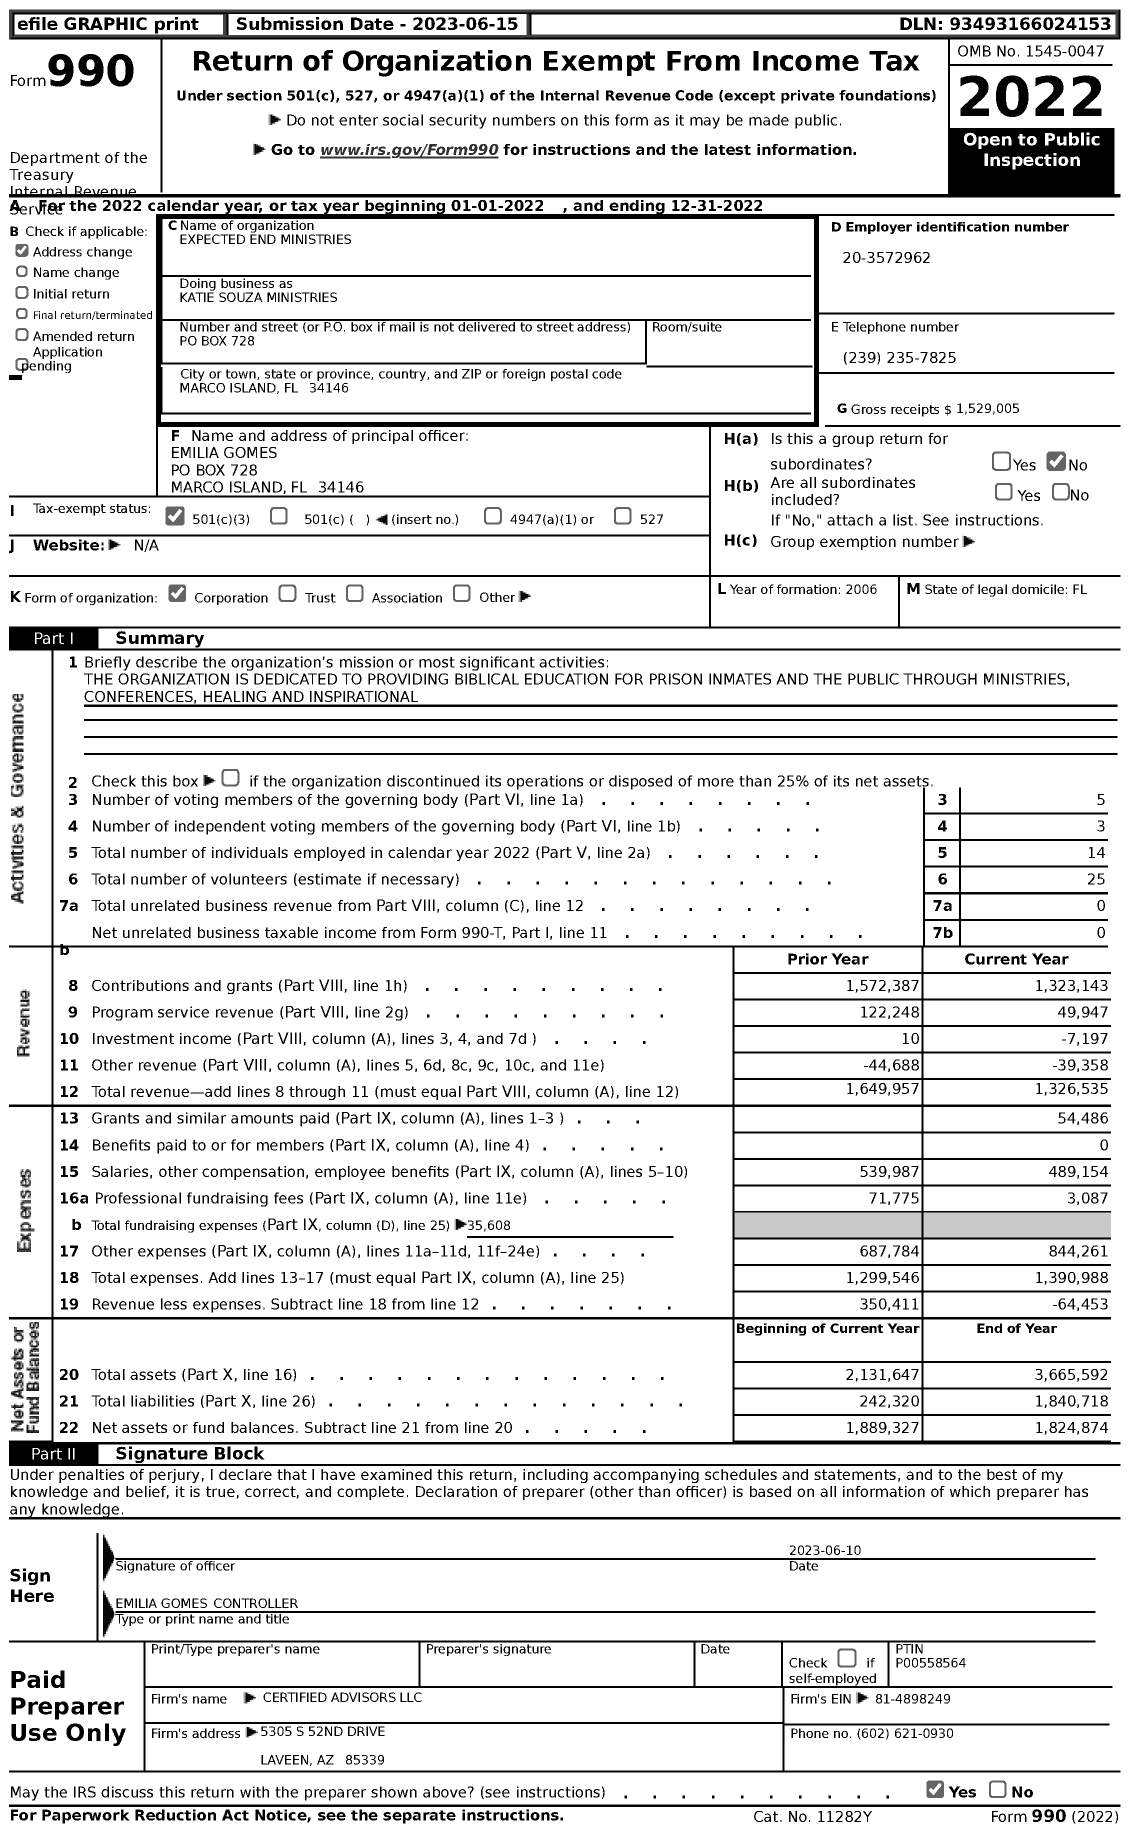 Image of first page of 2022 Form 990 for Katie Souza Ministries